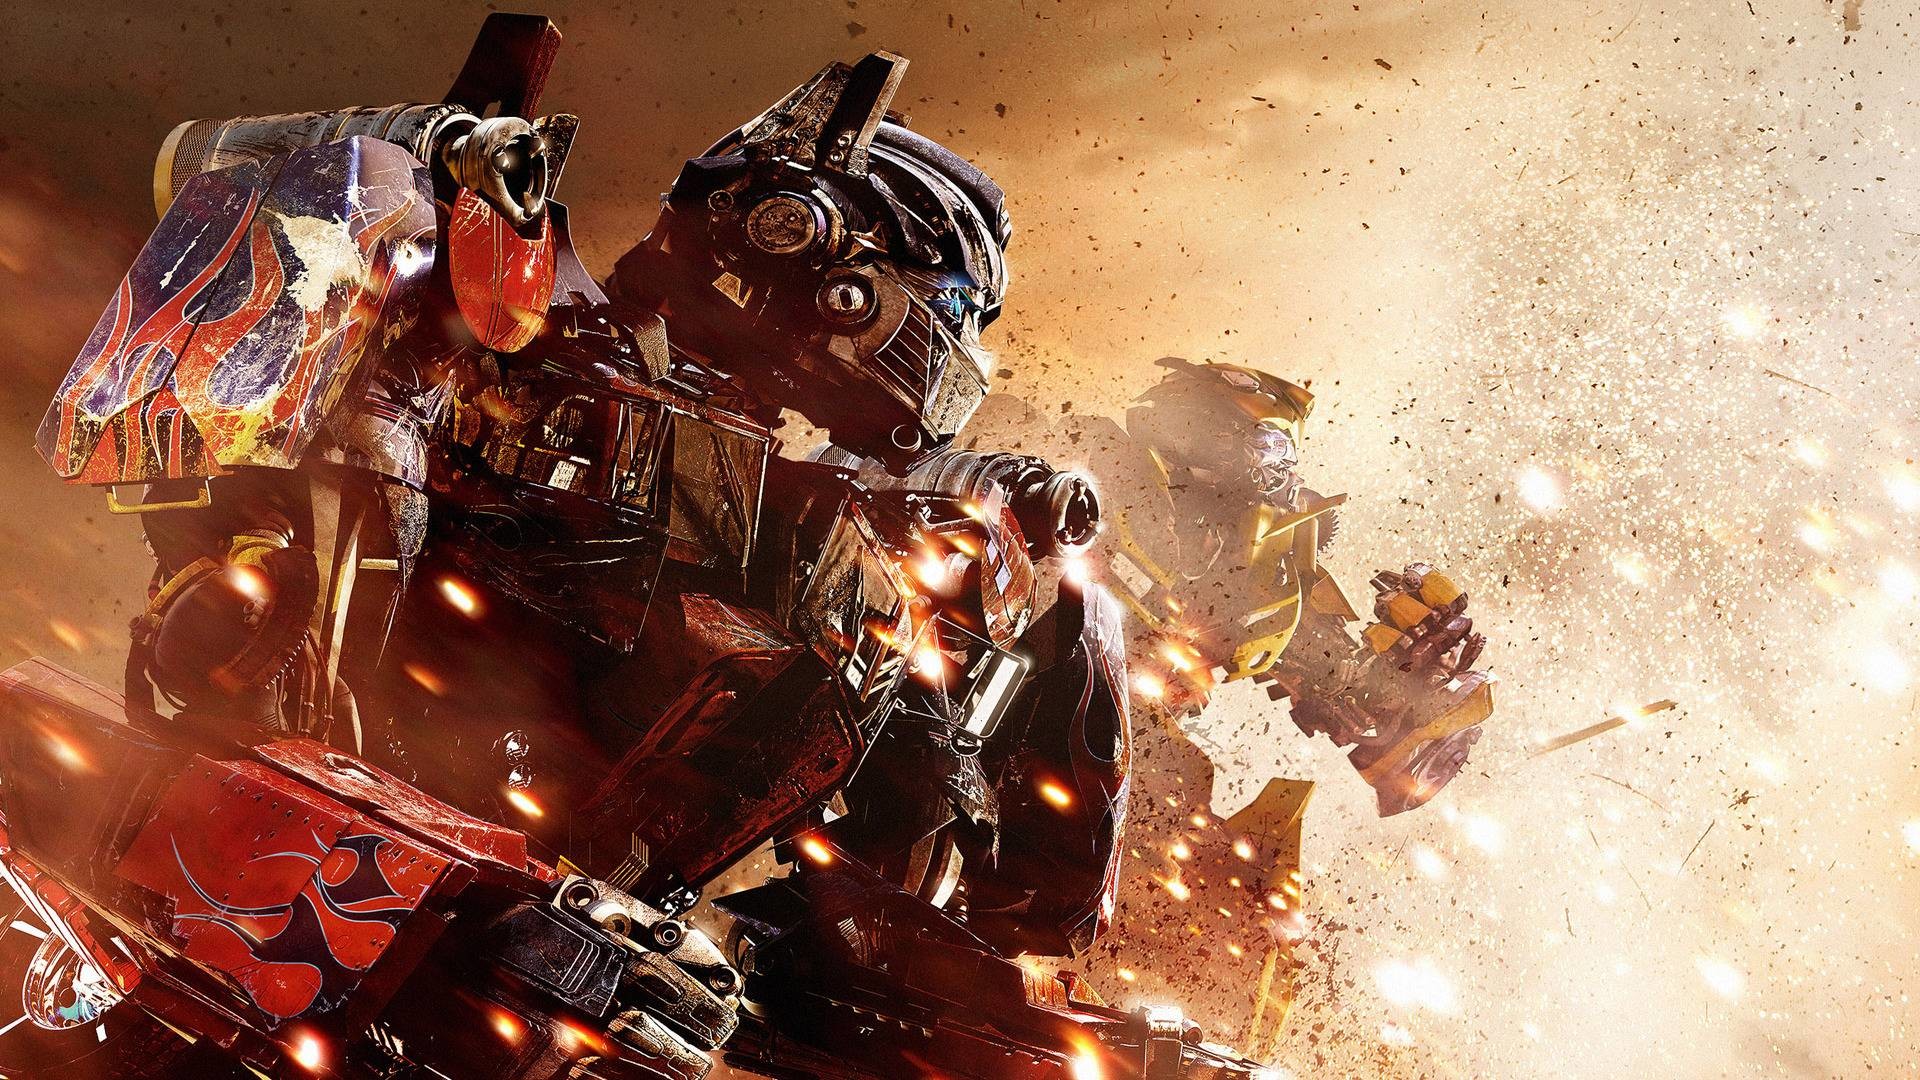 1920x1080 Optimus Bumblebee in Transformers 3 Wallpapers | HD Wallpapers